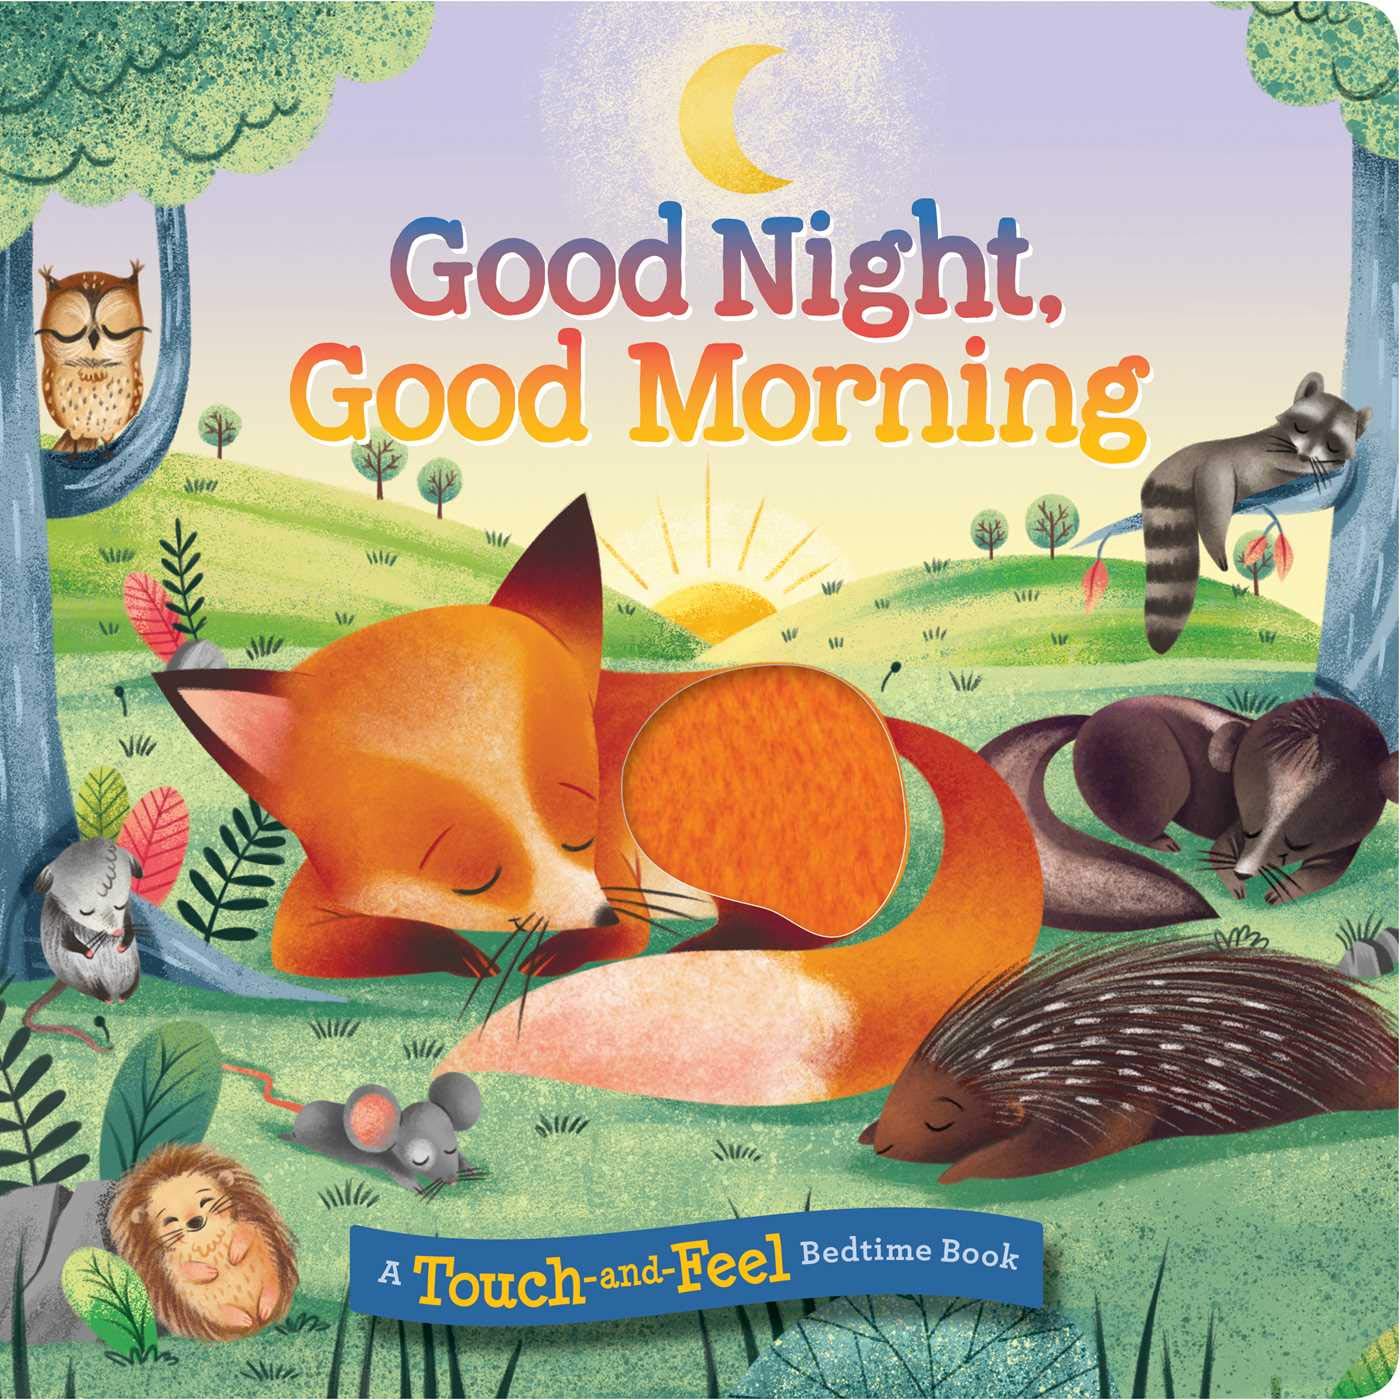 Children's Books :: All Children's Books :: Kids Books about Animals :: Good  Night, Good Morning - Paradise Cay - Wholesale Books, Gifts, Navigational  Charts, On Demand Publishing